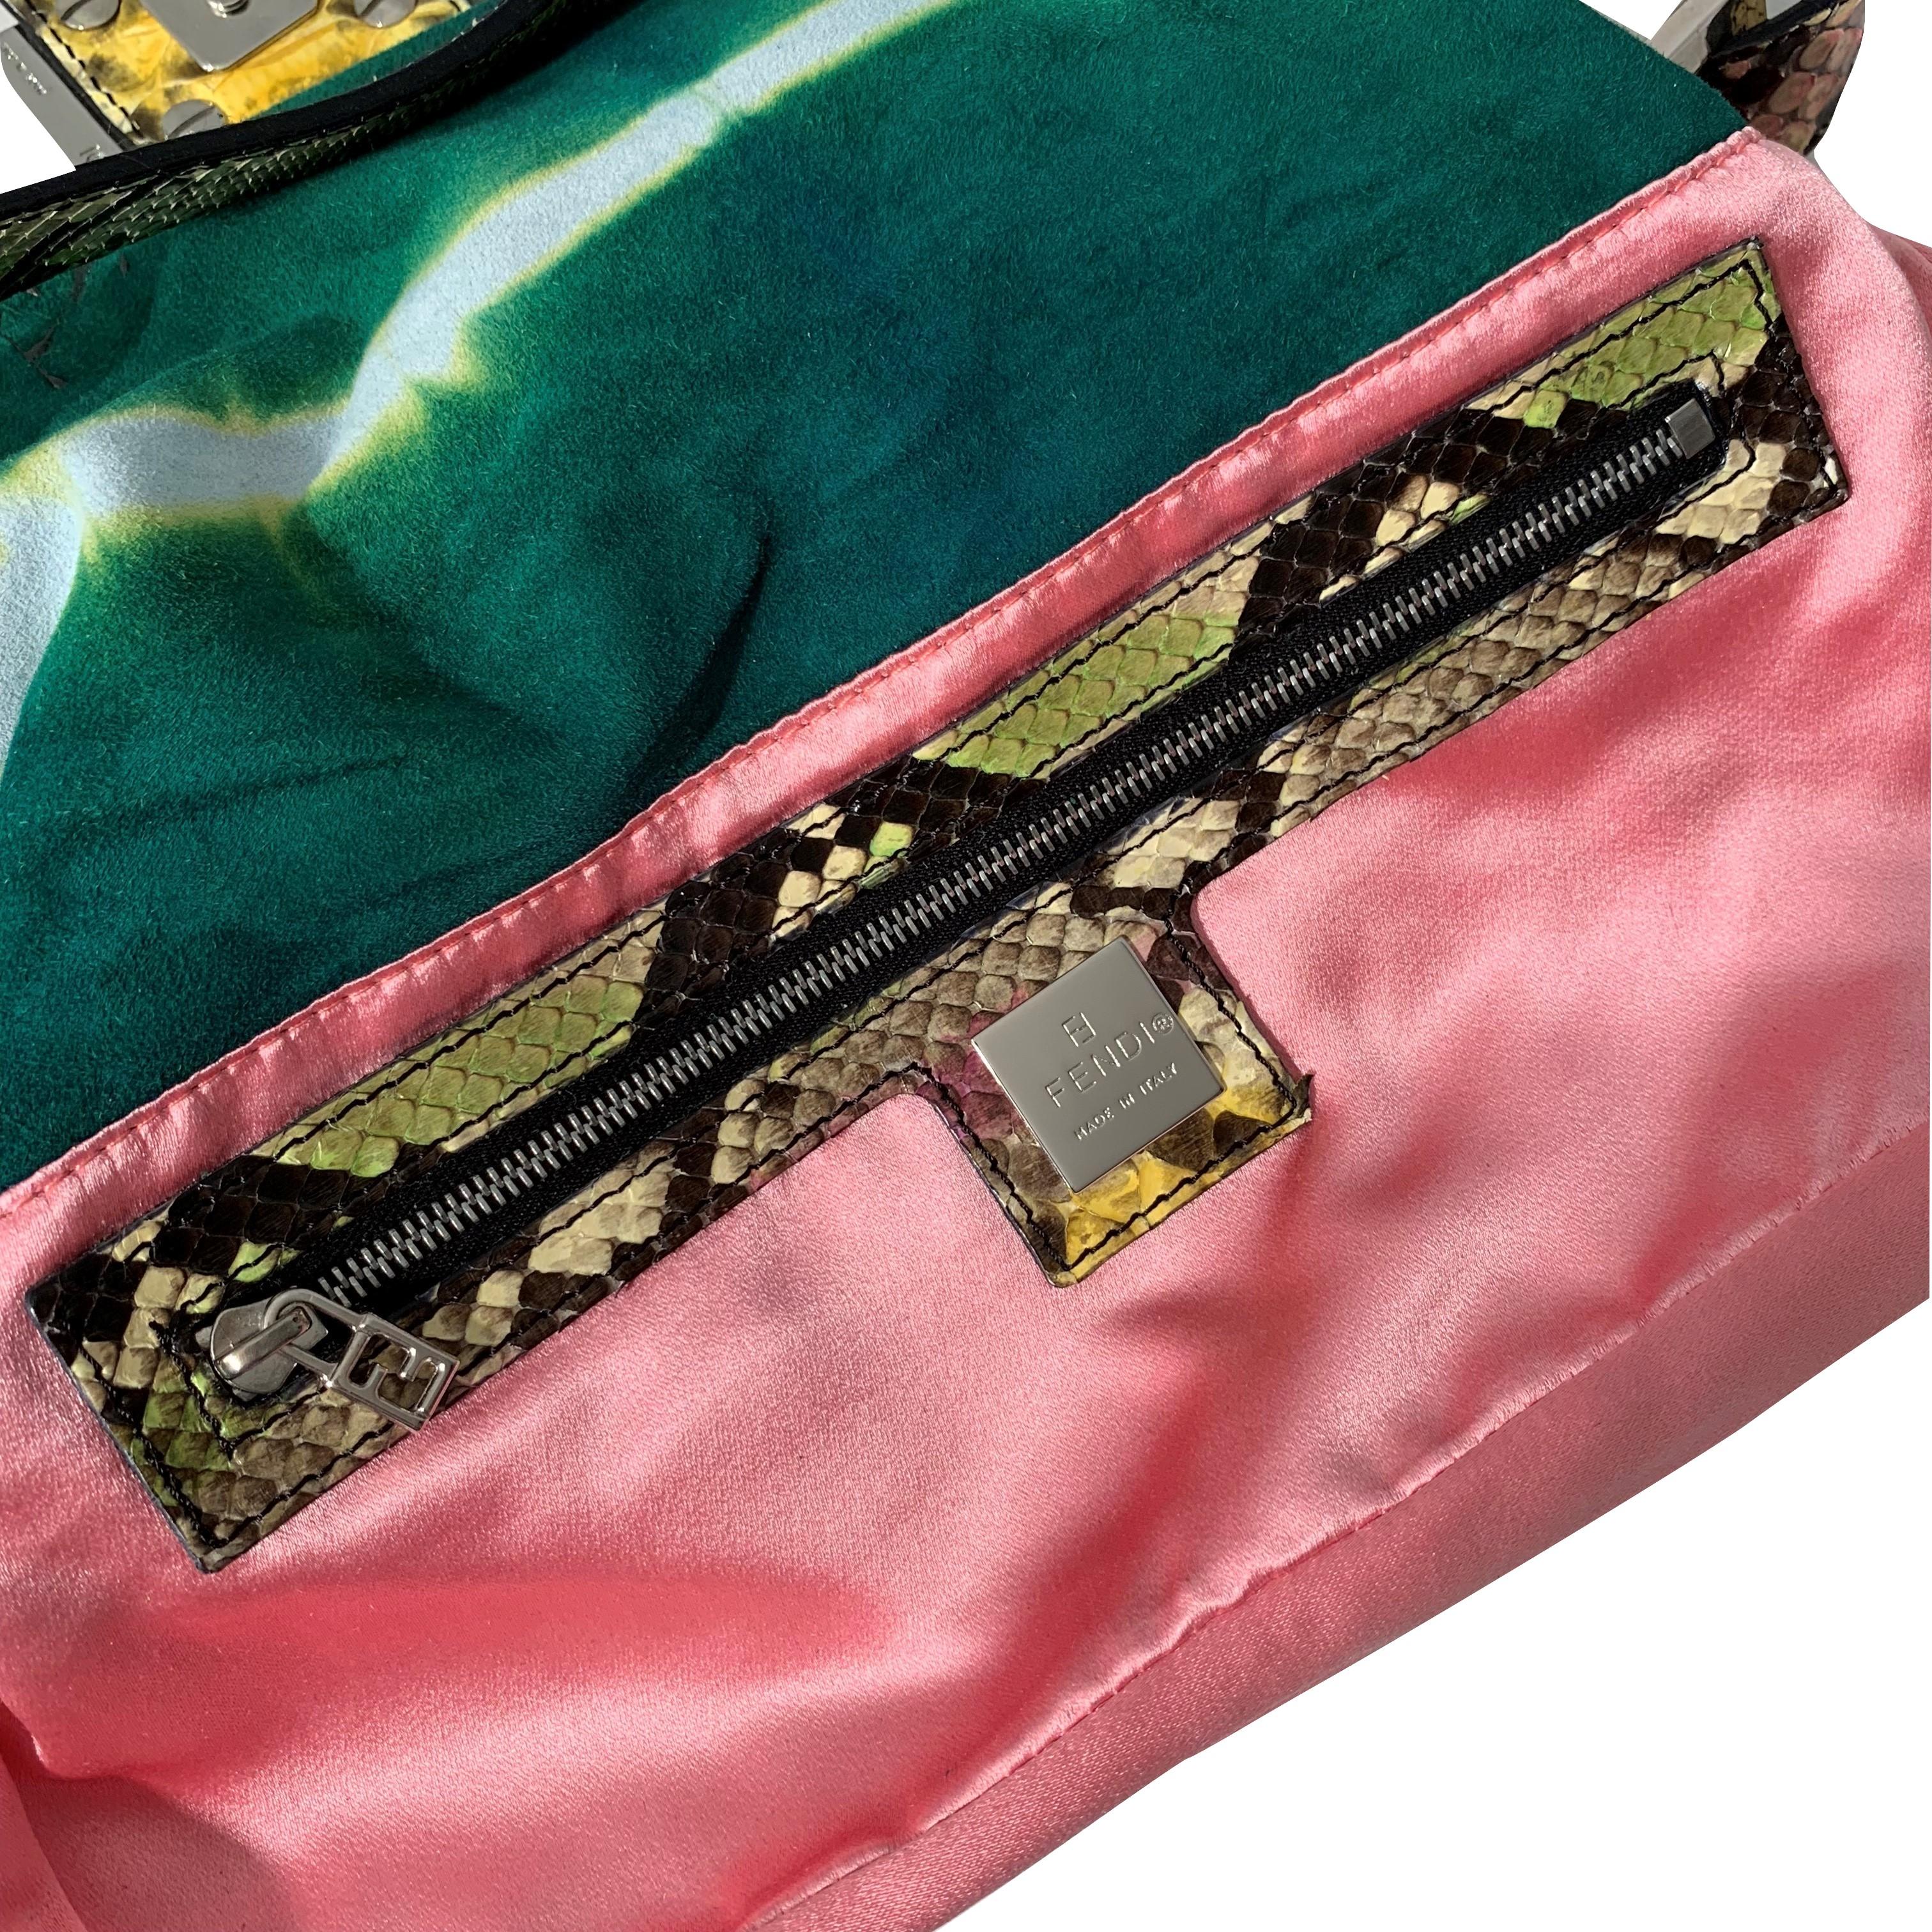 Women's New Fendi Hand Painted Python Bag Featured in the 15th Anniversary Baguette Book